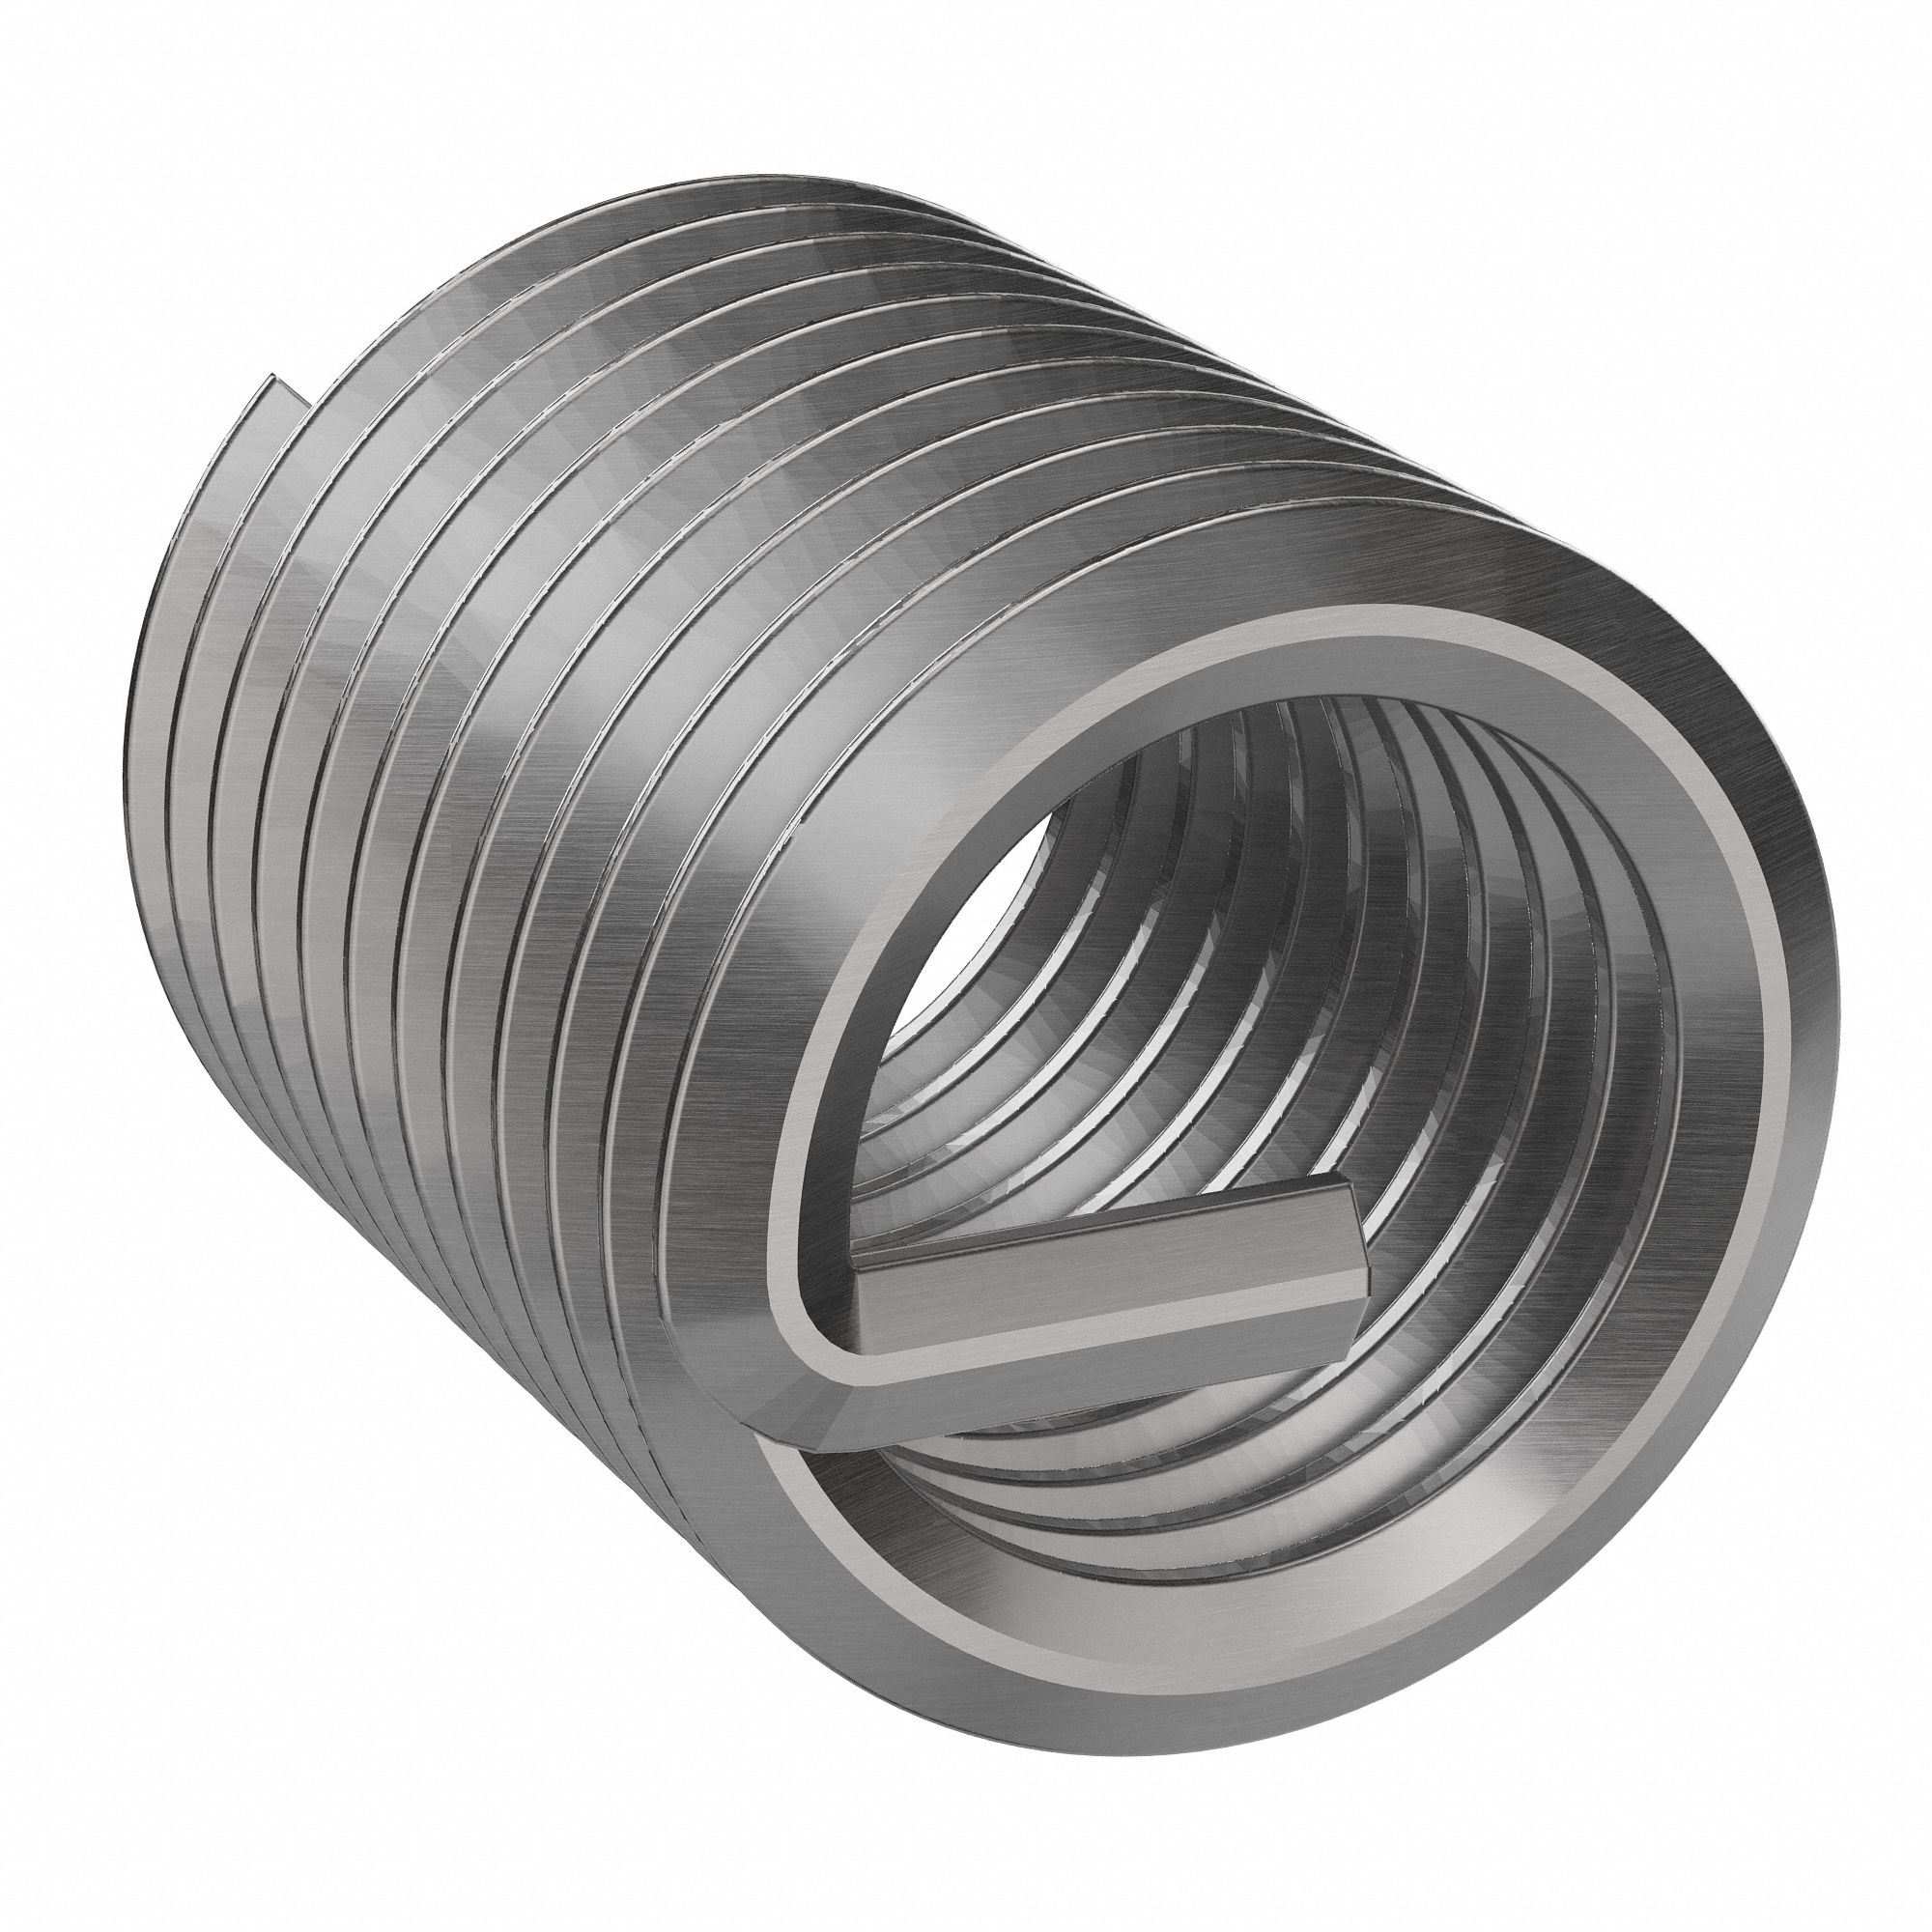 Details about   GRAINGER APPROVED 83187X Helical Inserts Non-Lock,M26x1.5,1pcs. 